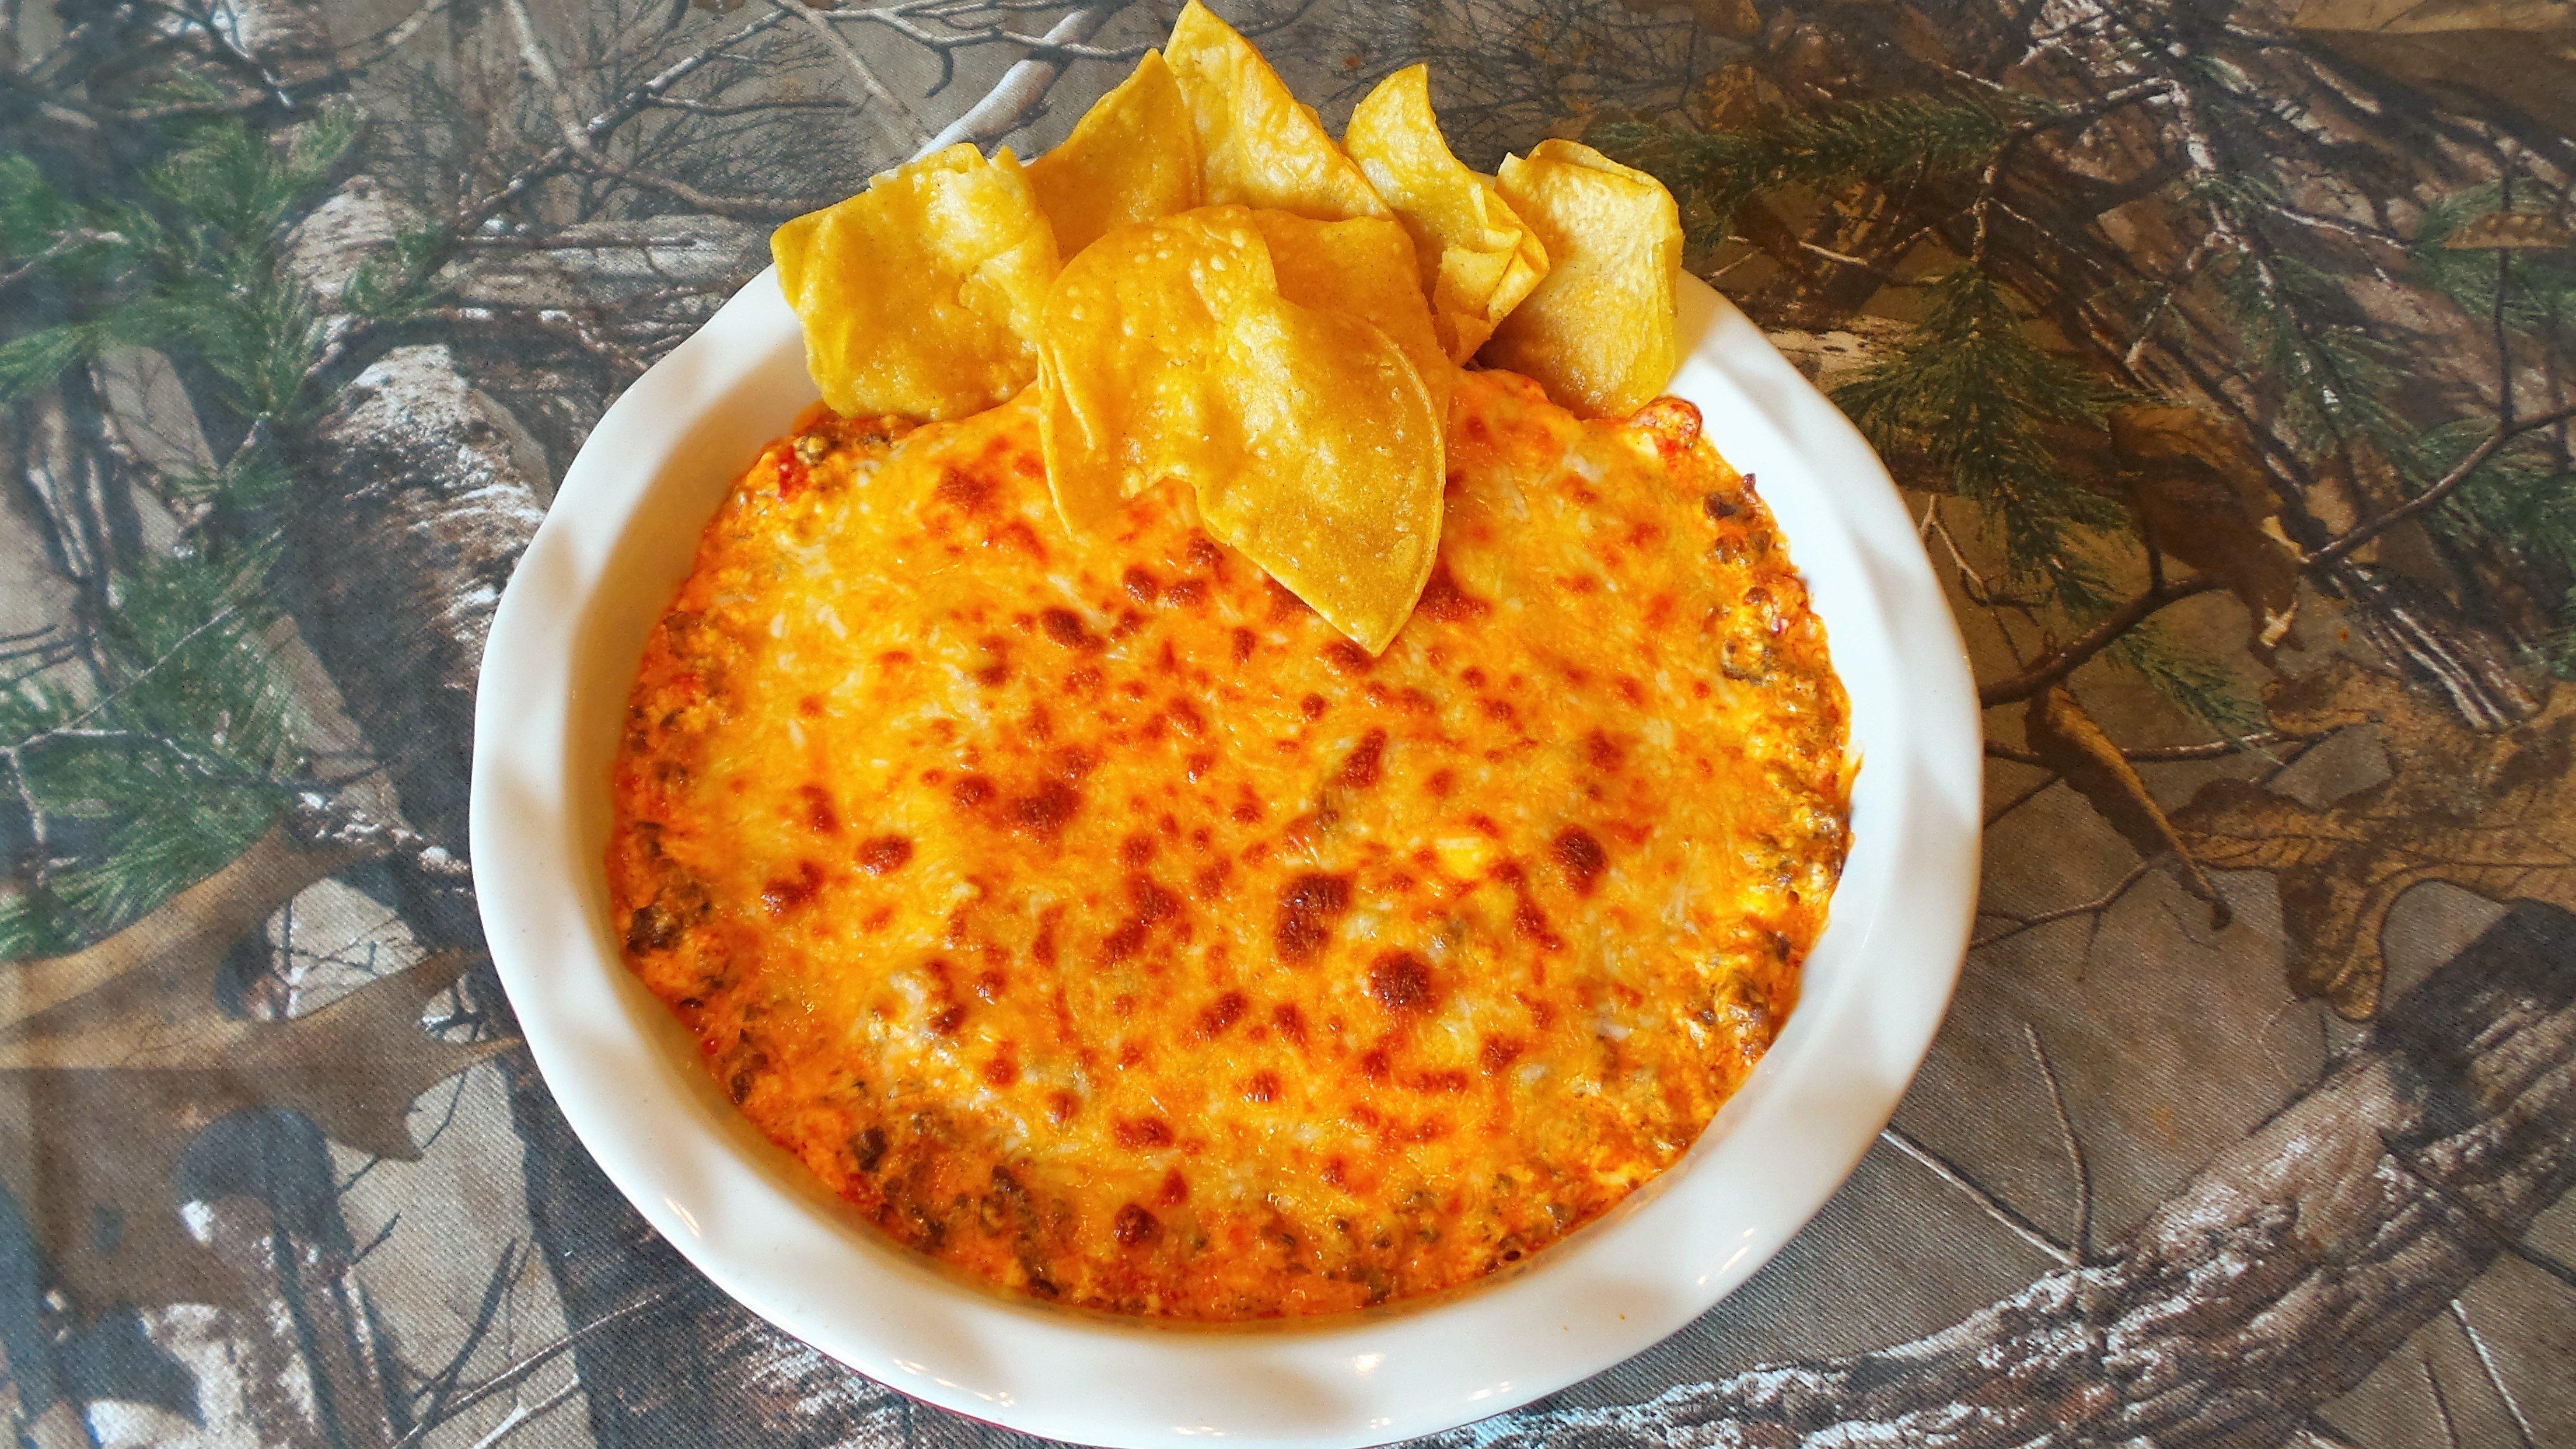 Serve the dip piping hot with corn chips for dipping.